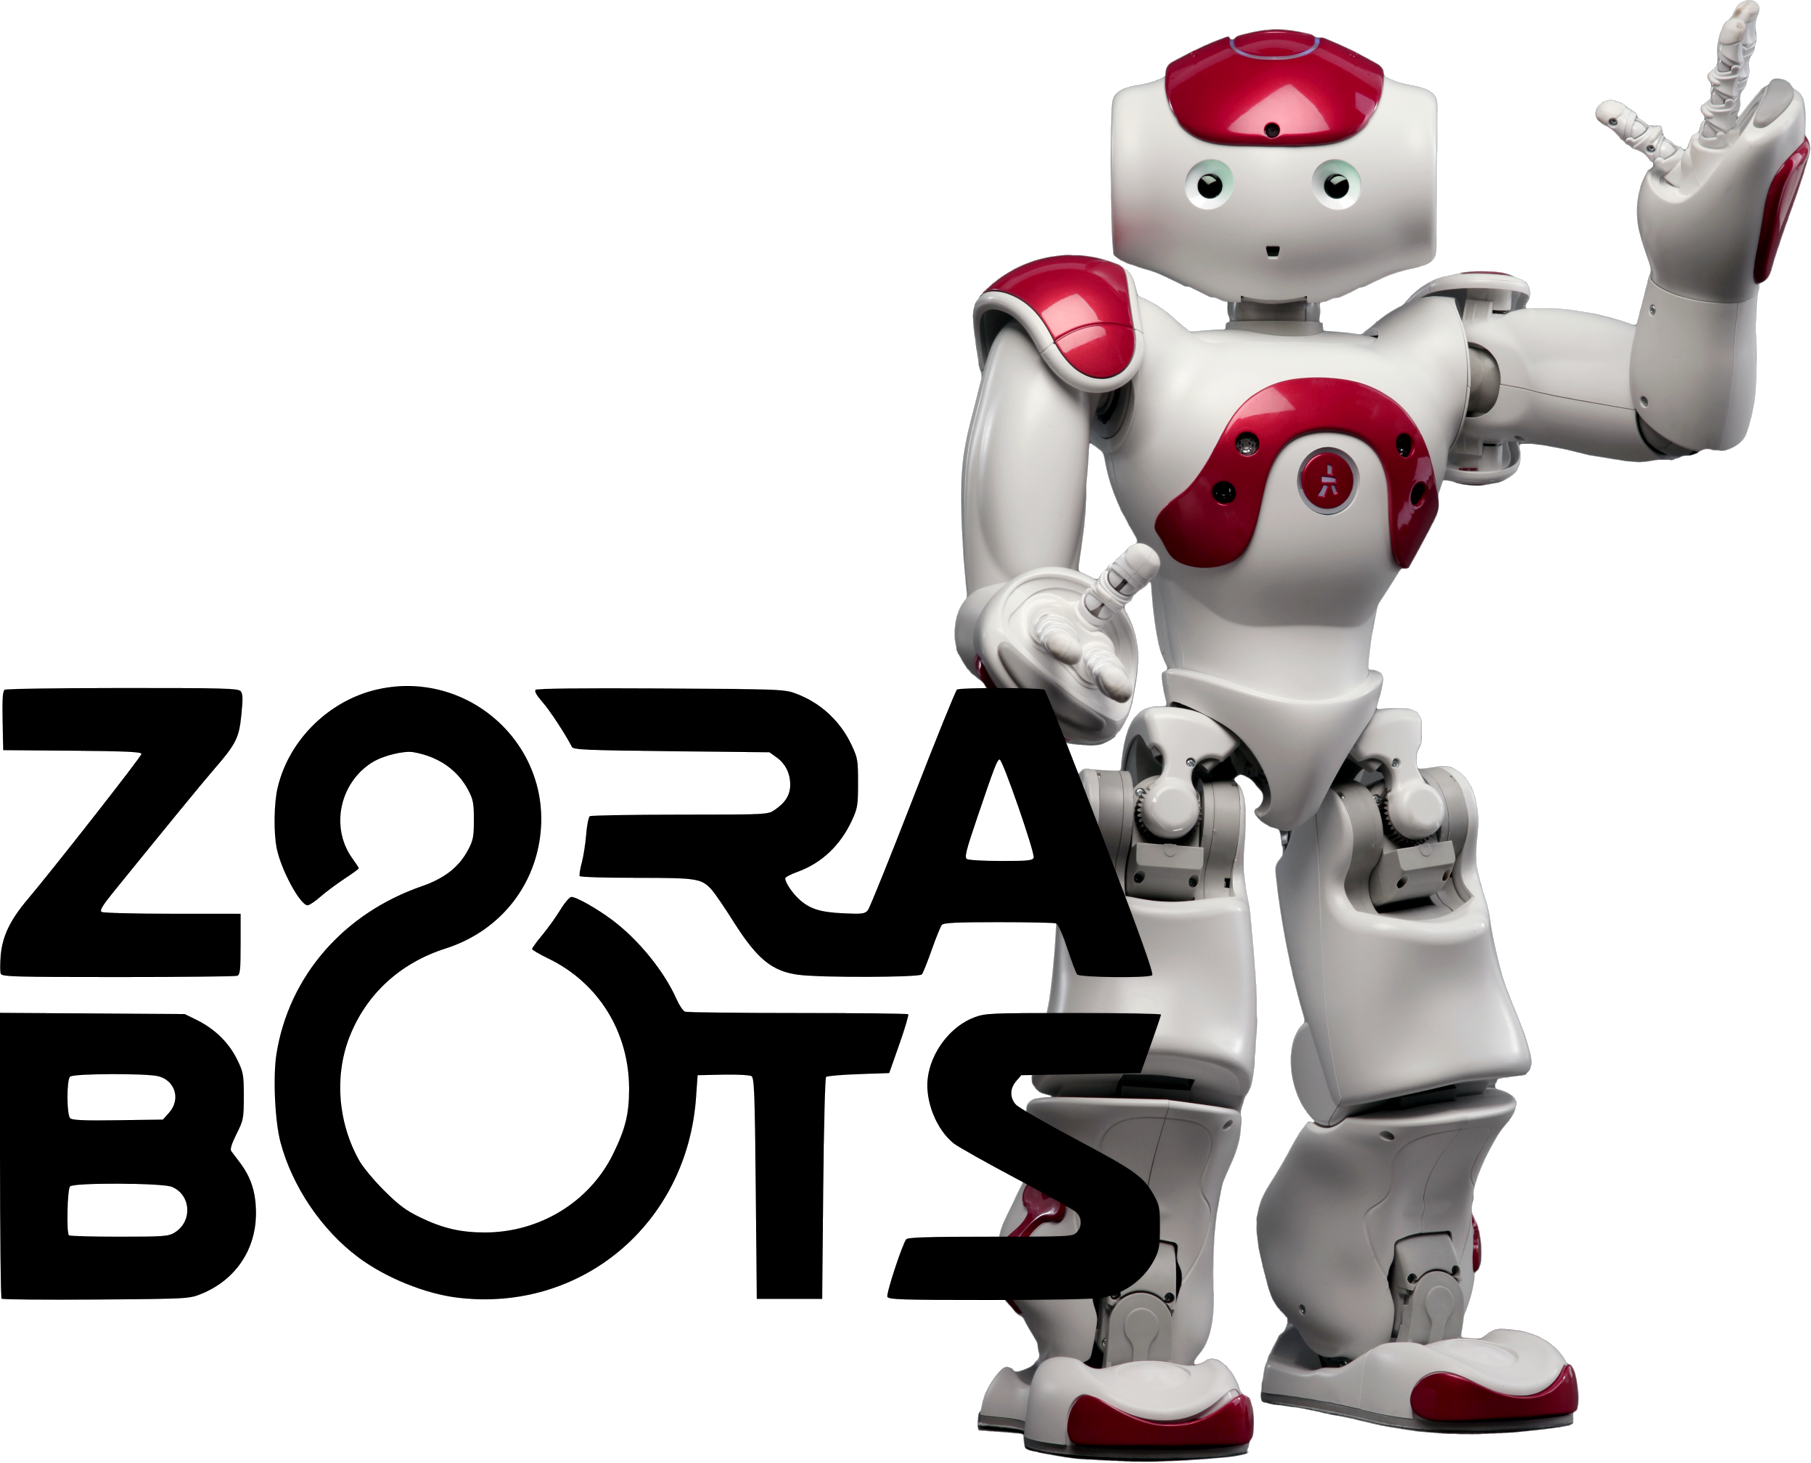 Robot Machine Images PNG Download Free PNG Image